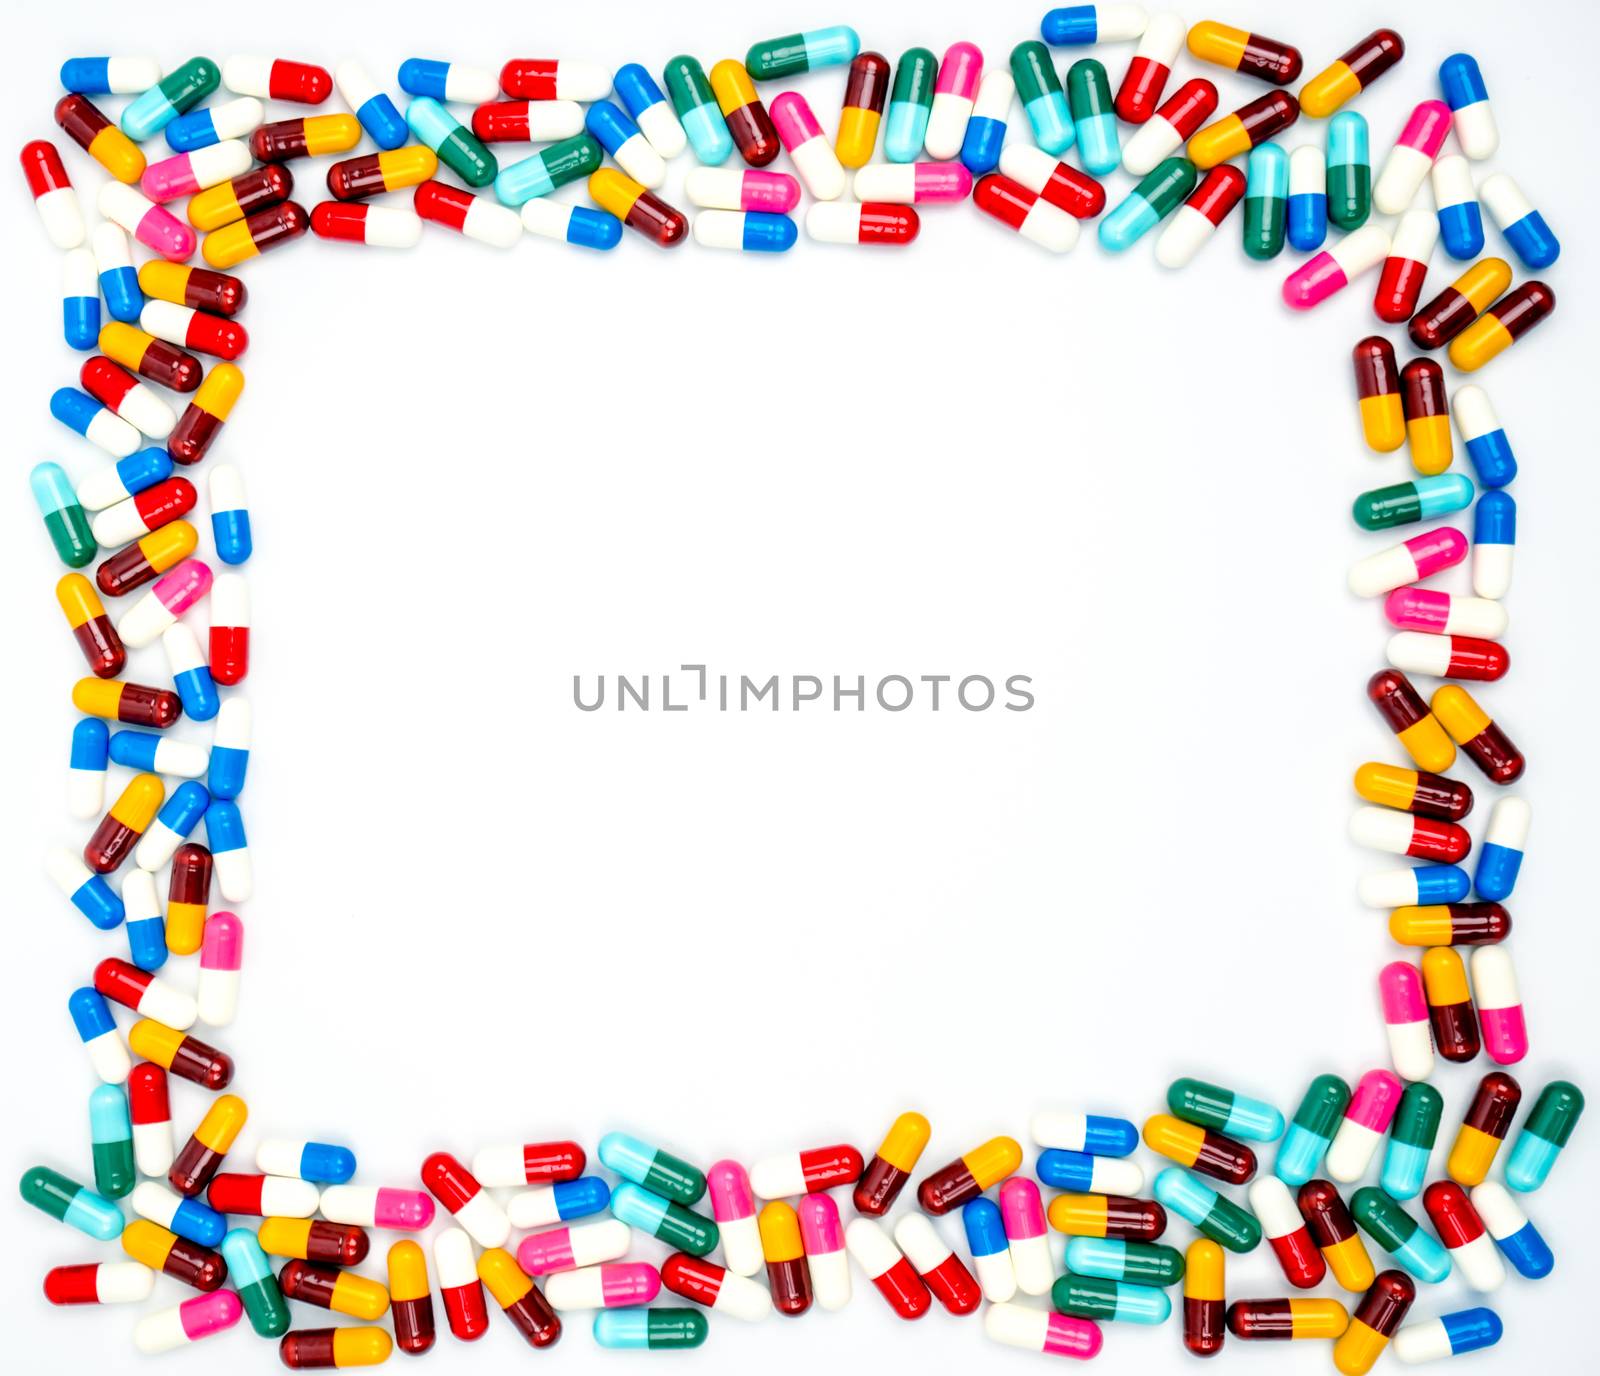 Colorful of antibiotics capsule pills on white background with copy space. Drug resistance concept. Antibiotics drug use with reasonable and global healthcare concept. Background for text